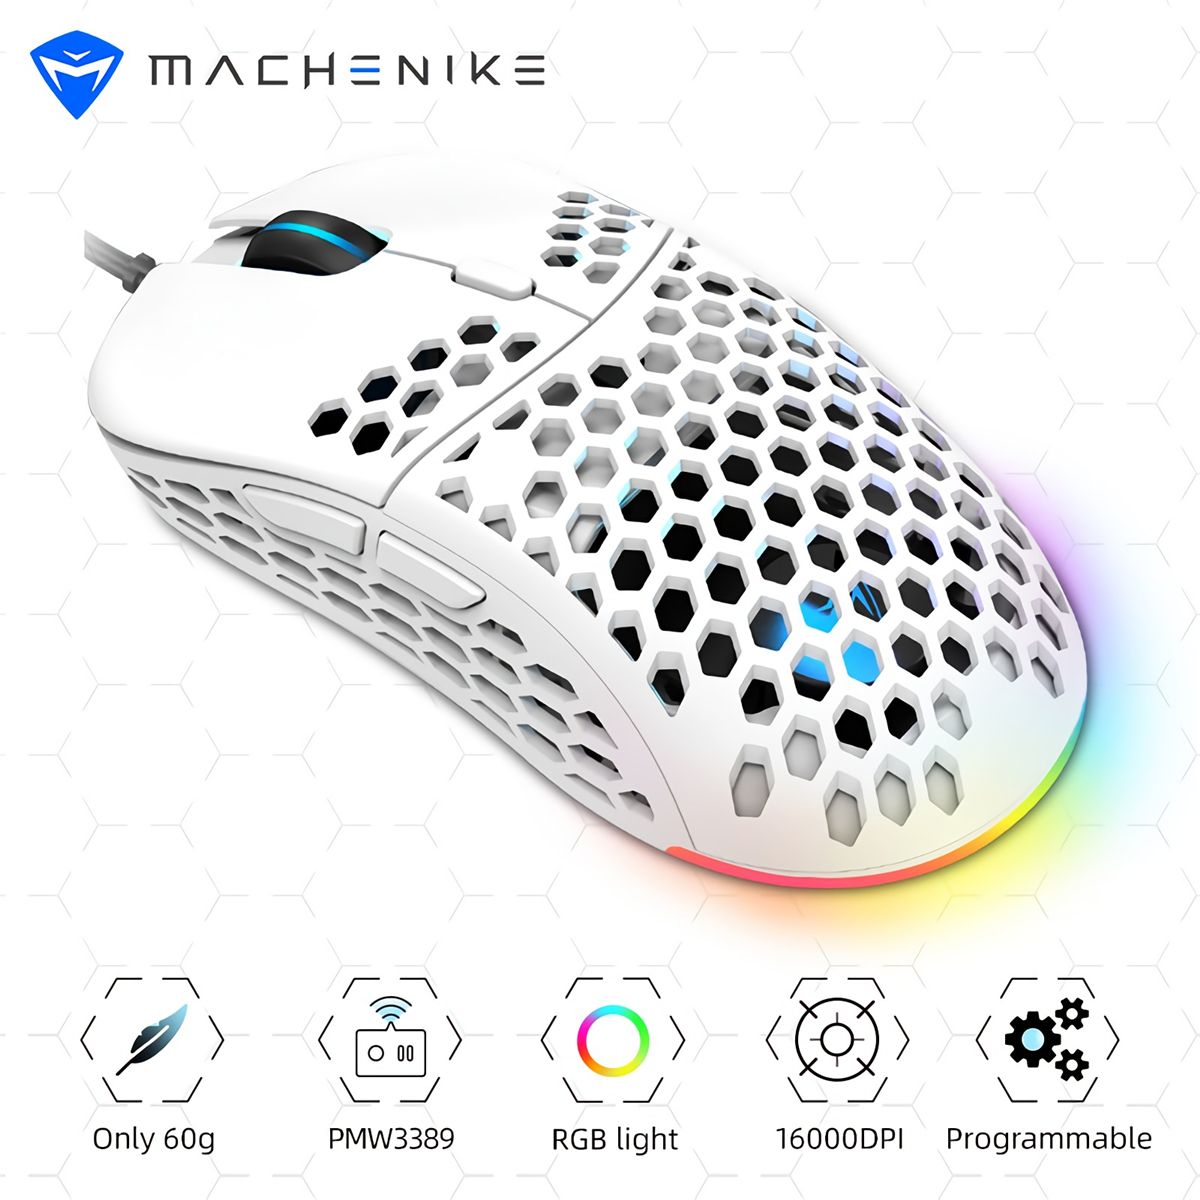 Machenike-M620-Wired-Gaming-Mouse-16000DPI-PMW3389-RGB-Computer-Mouse-Programmable-Hollow-Honeycomb--1738182